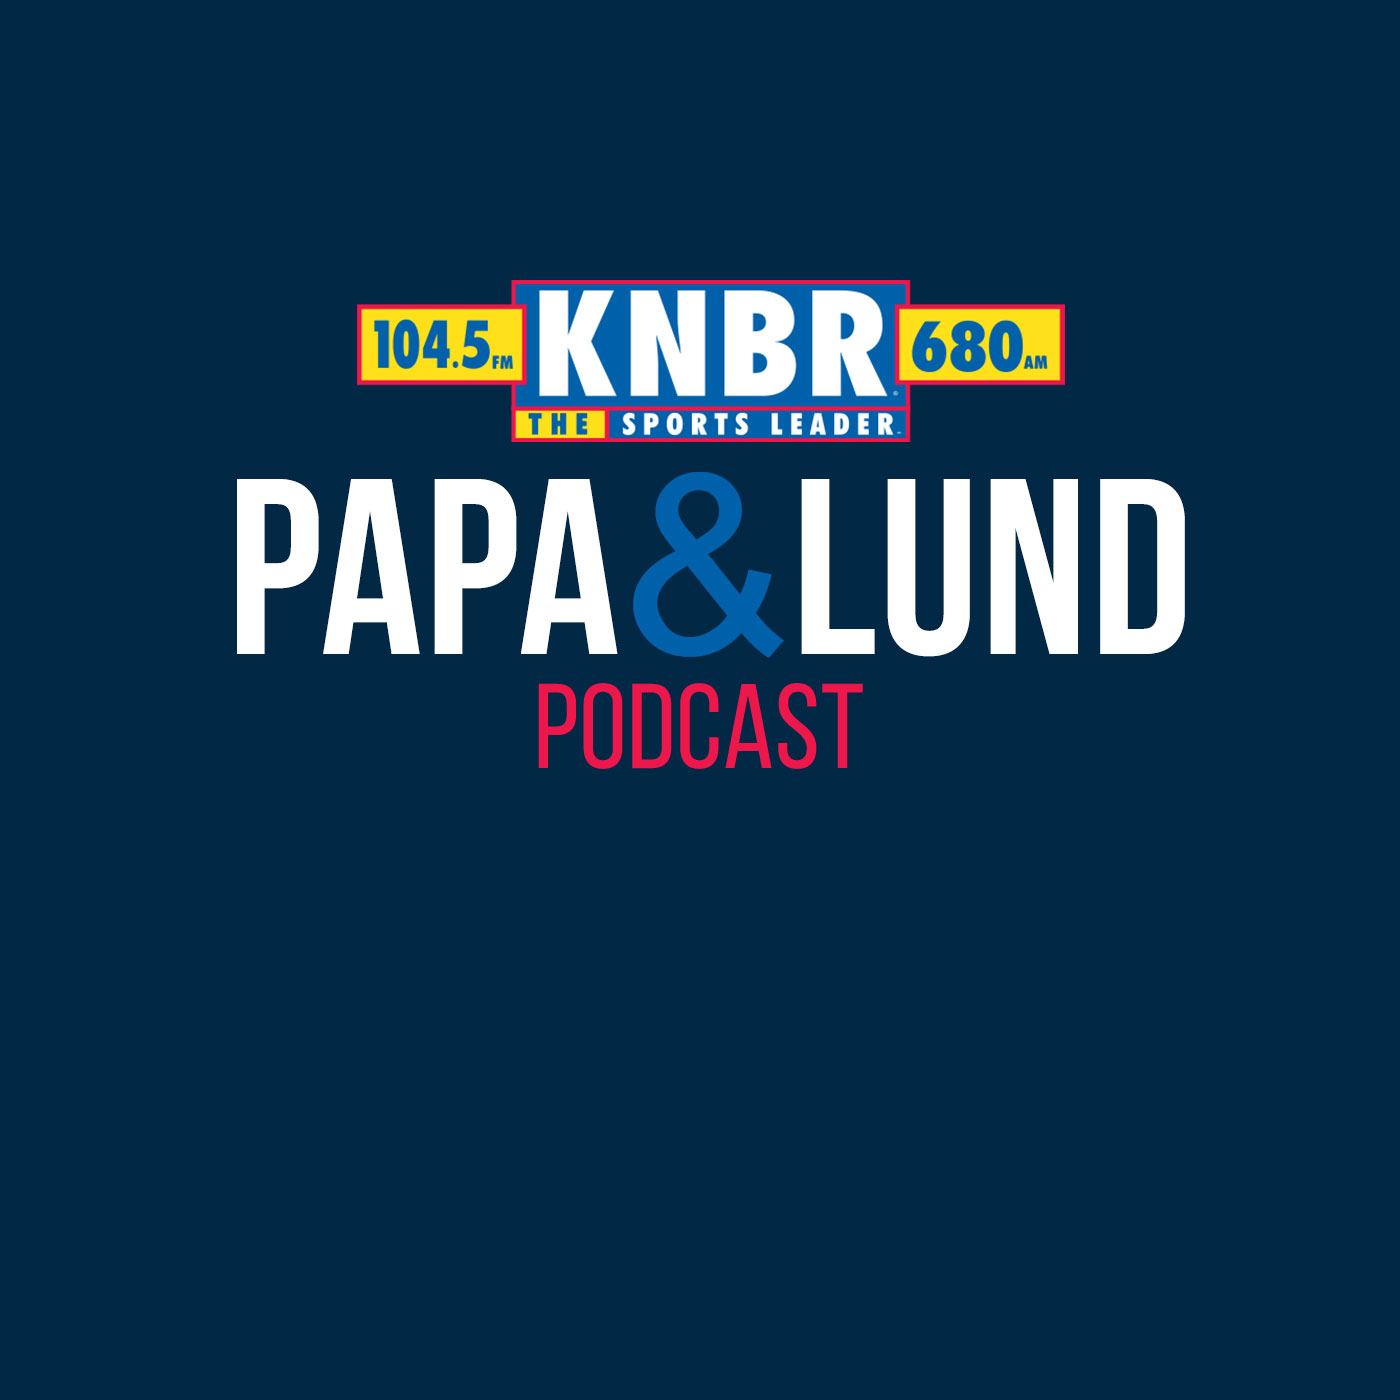 11-13 Papa & Lund discuss Brock Purdy's performance and his TD pass to Brandon Aiyuk that made Kyle Shanahan furious and compares it to another Player-Coach dynamic in the Bay Area